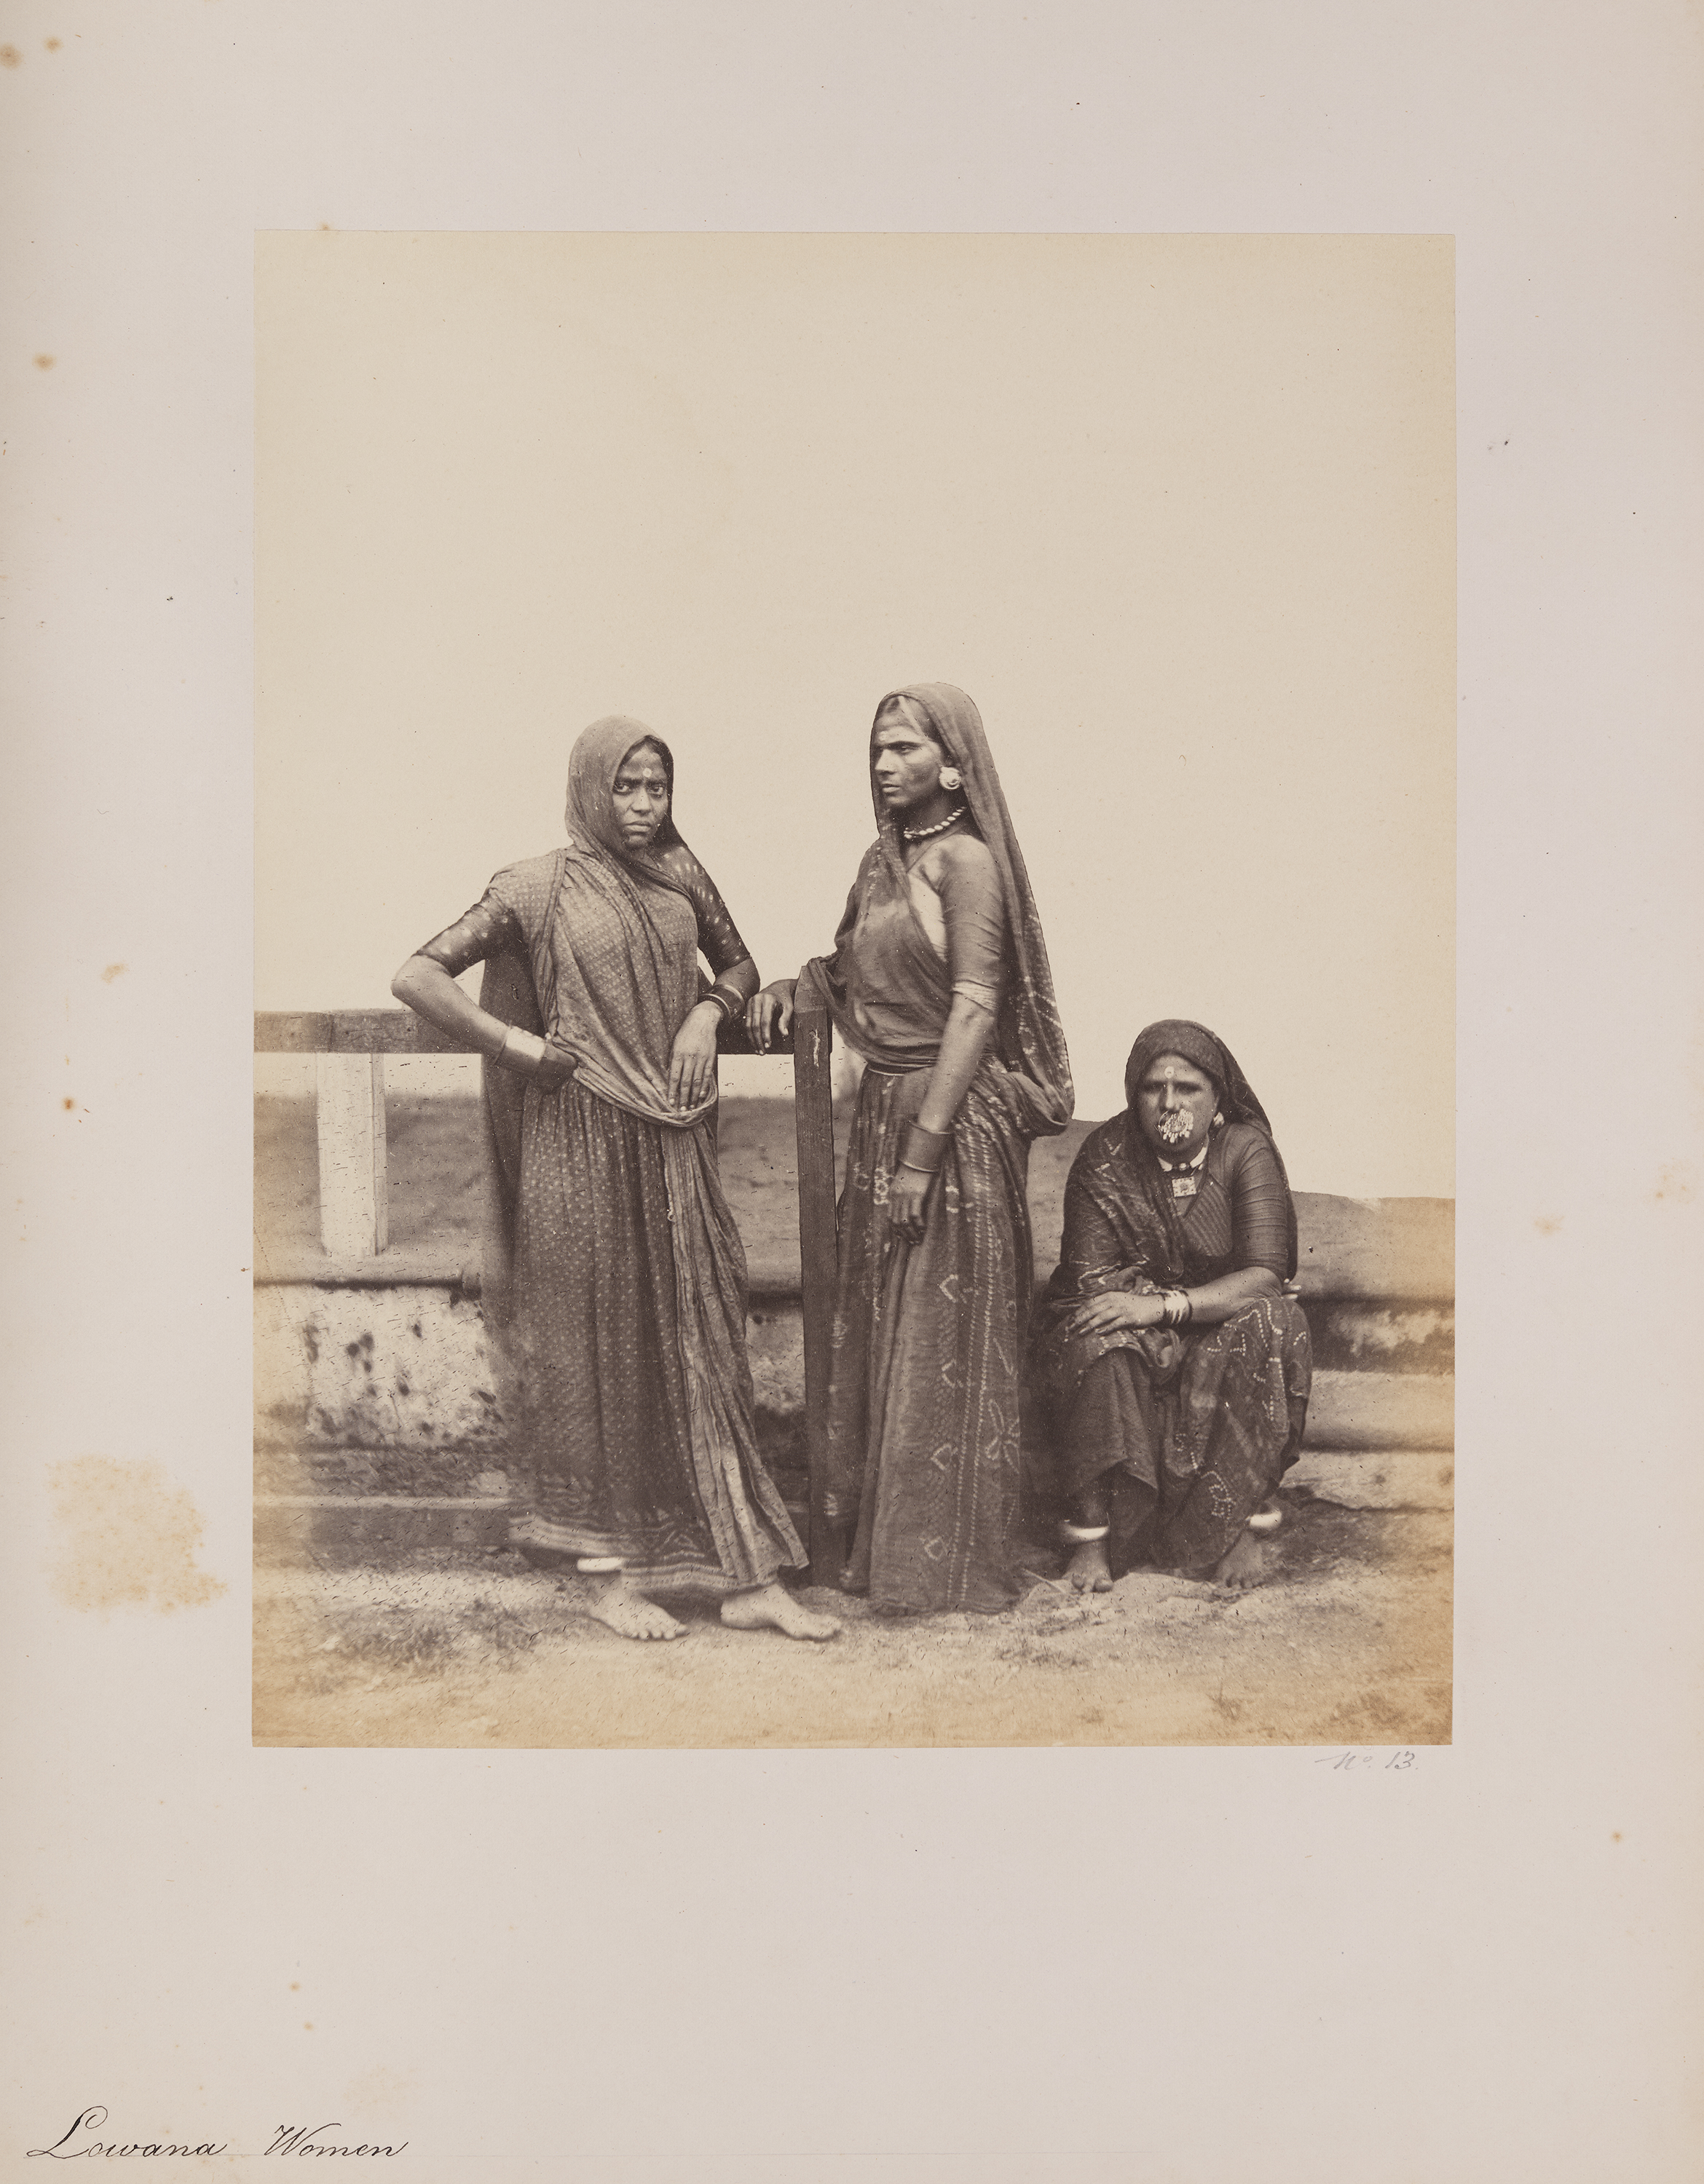  "Lowana Women" by William Johnson from  Photographs of Western India. Volume I. Costumes and Characters  (1855-1862). Image from  Wikimedia Commons  courtesy Southern Methodist University, Central University Libraries, DeGolyer Library, 